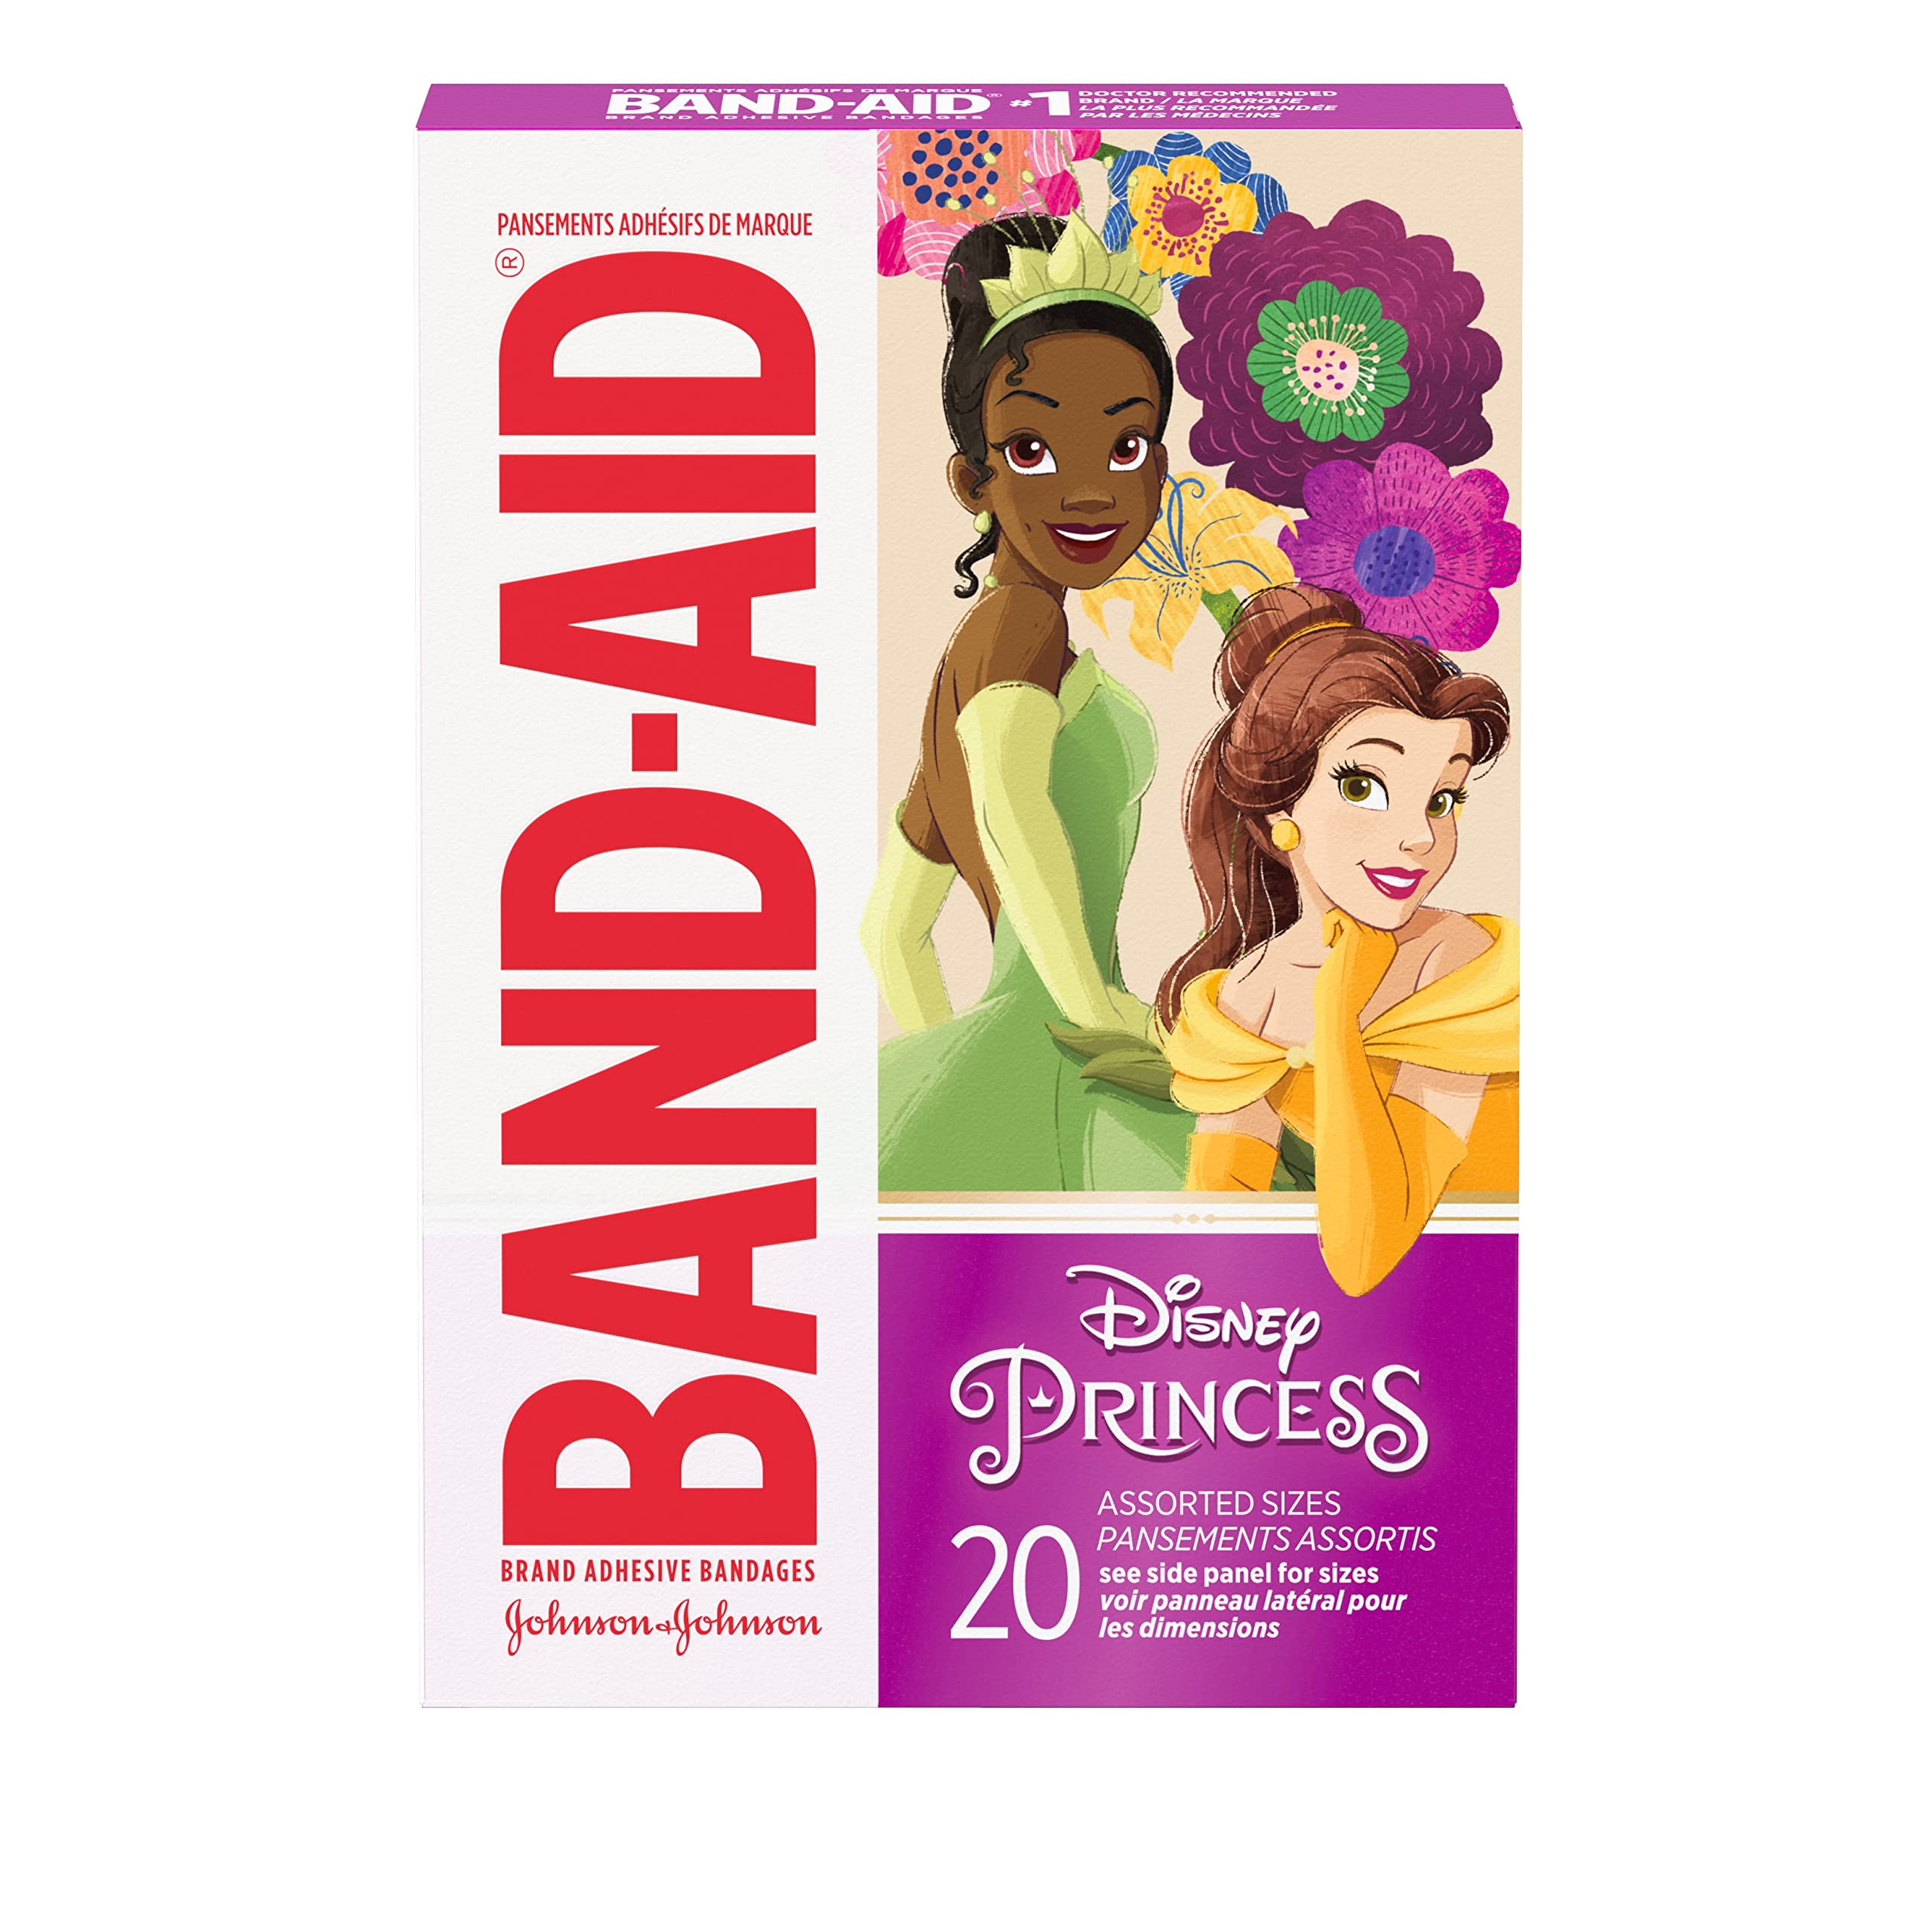 Band-Aid Brand Adhesive Bandages for Minor Cuts & Scrapes, Wound Care Featuring Disney Princess Characters, Fun Bandages for Kids and Toddlers, Assorted Sizes, 20 Count